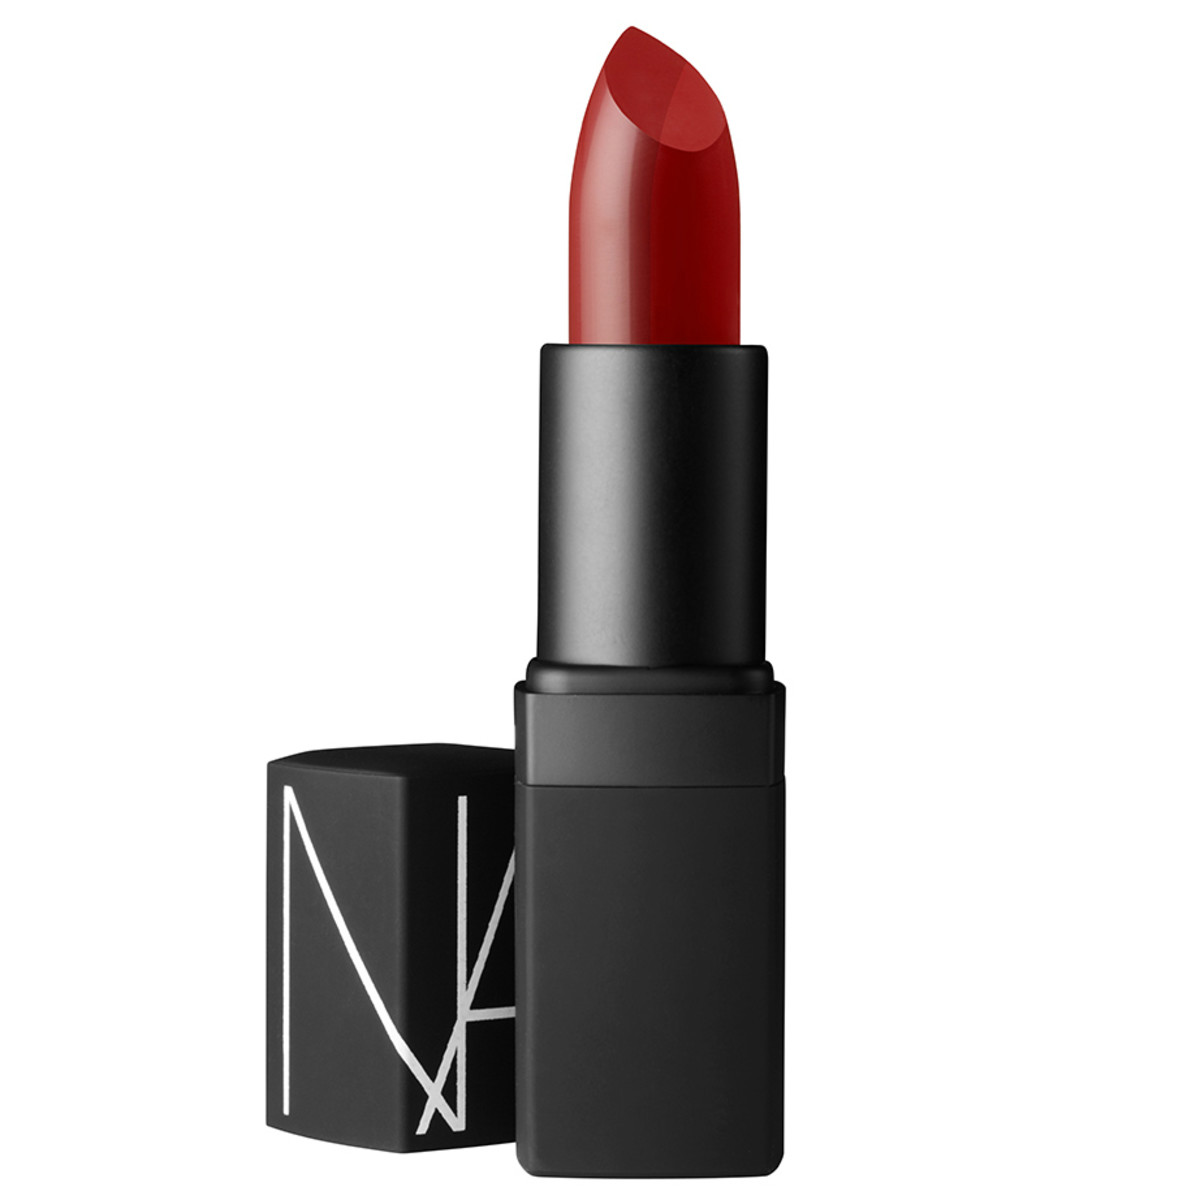 Nars Semi-Matte Lipstick in Shanghai Express, $27, available at Nars Cosmetics.